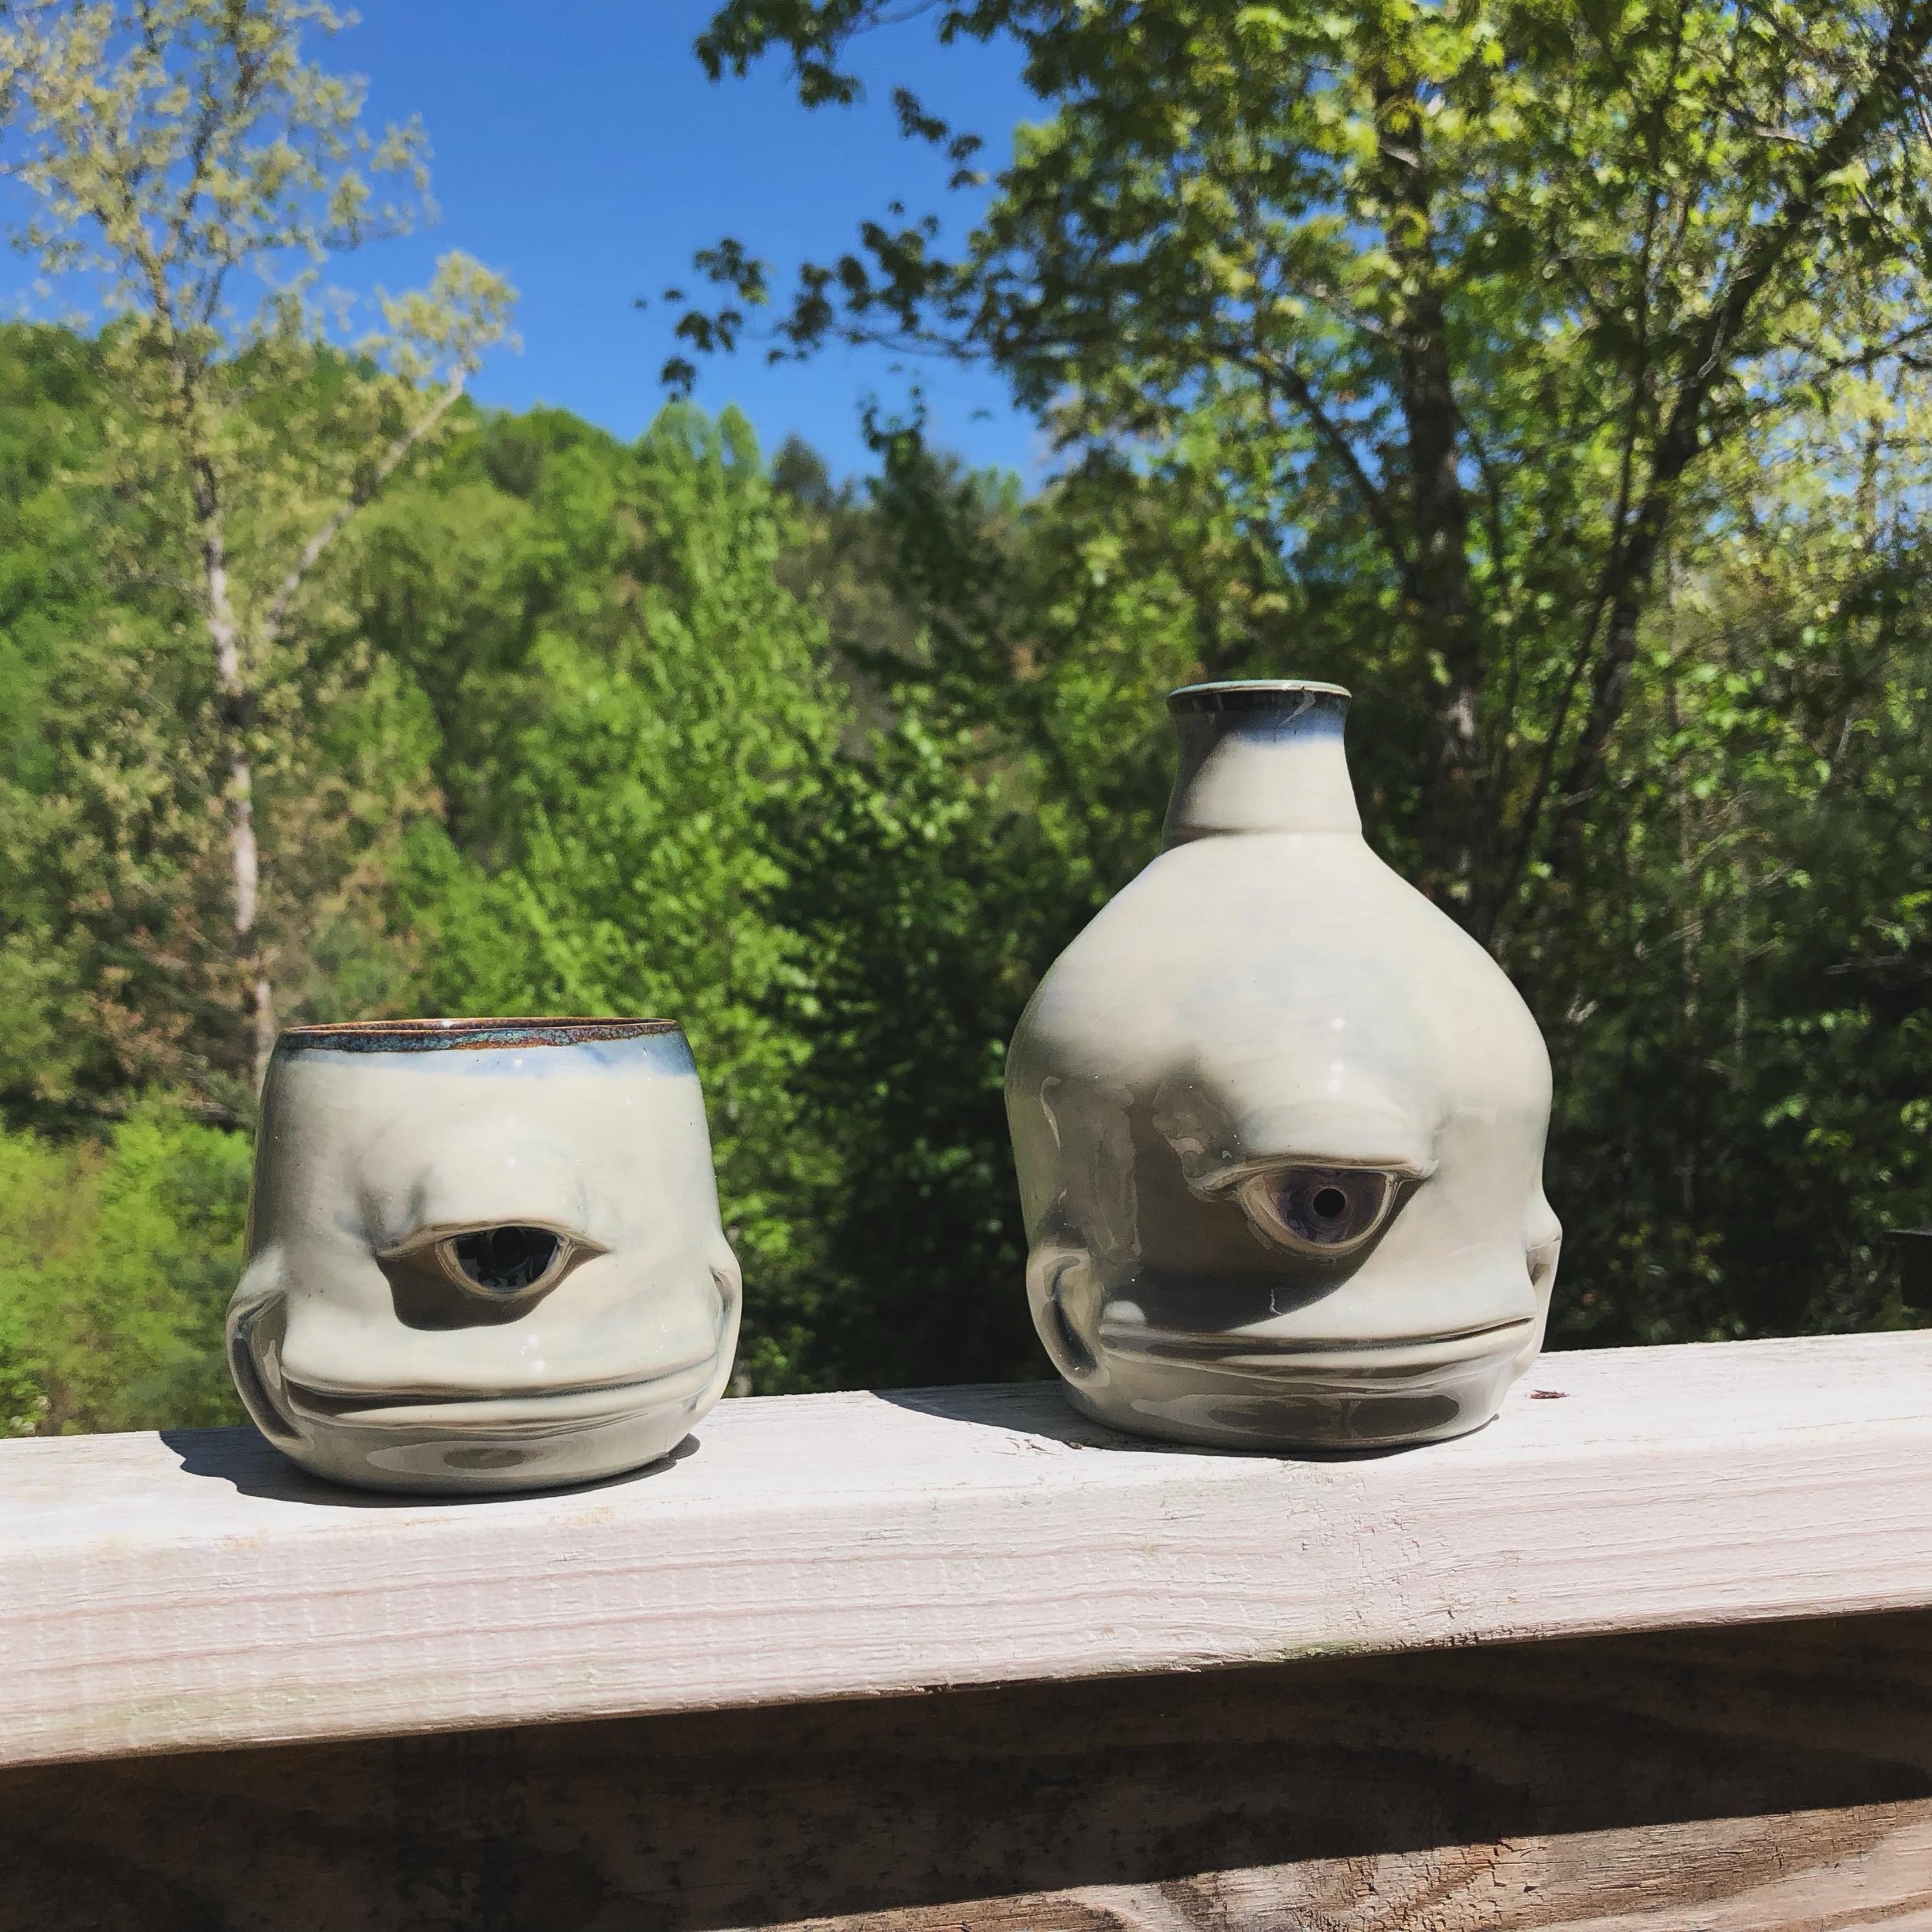 😑

Posting everyday until the Spring Southern Pottery Show! 

Do you like muddy faces? Come see all the great art and artists in Gillsville on May 11th from 8a-2p! See my highlight  for more information. 

#pottery #handthrown #handsculpted #handpai